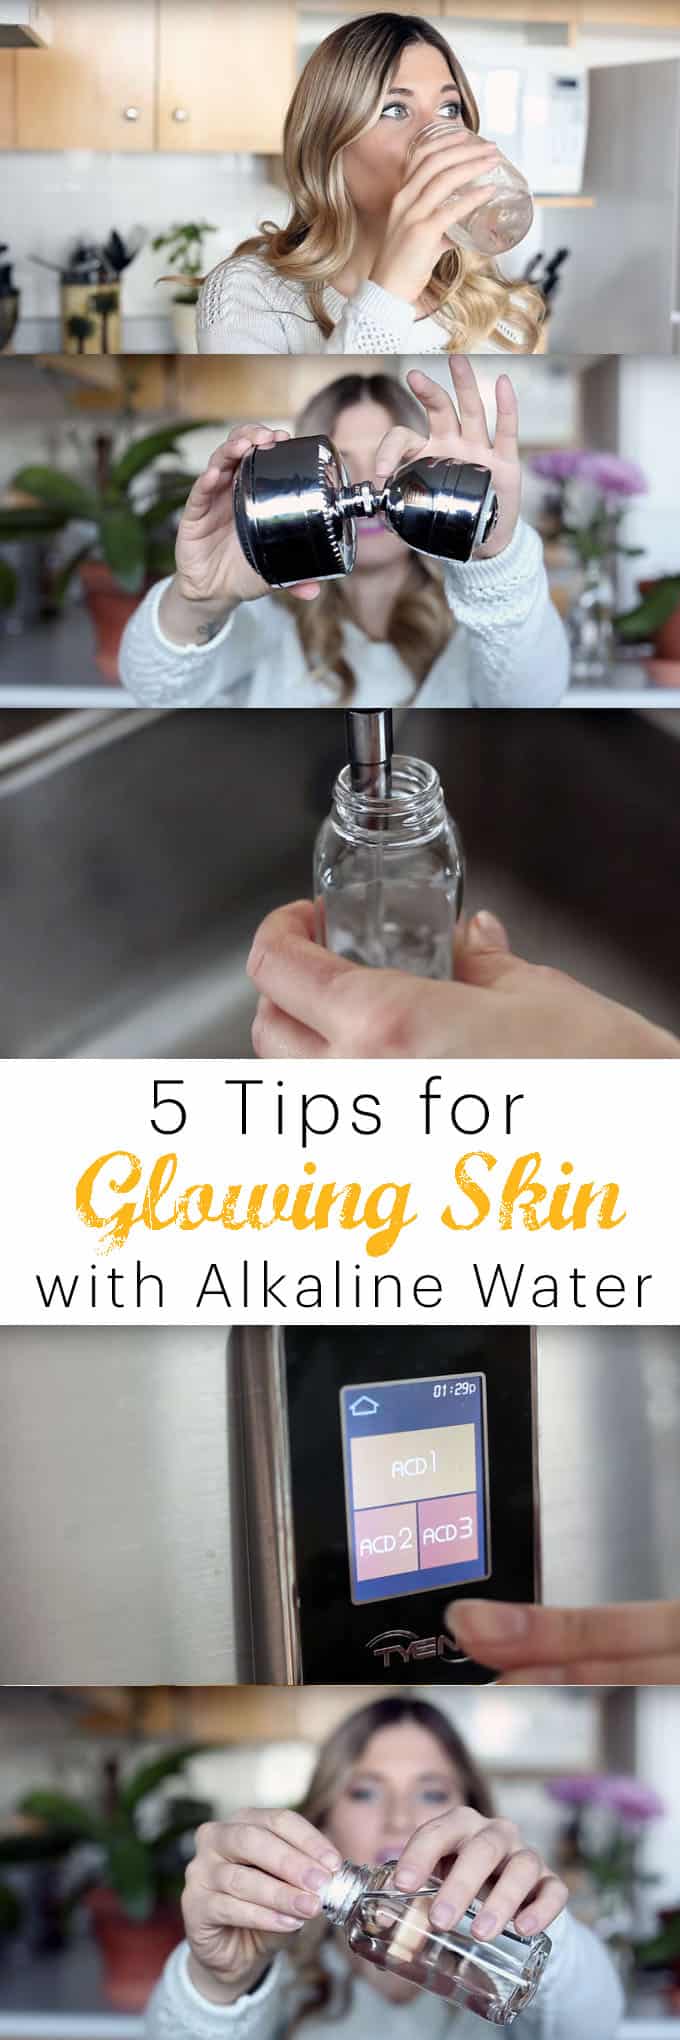 How to clean your skin naturally with alkaline water